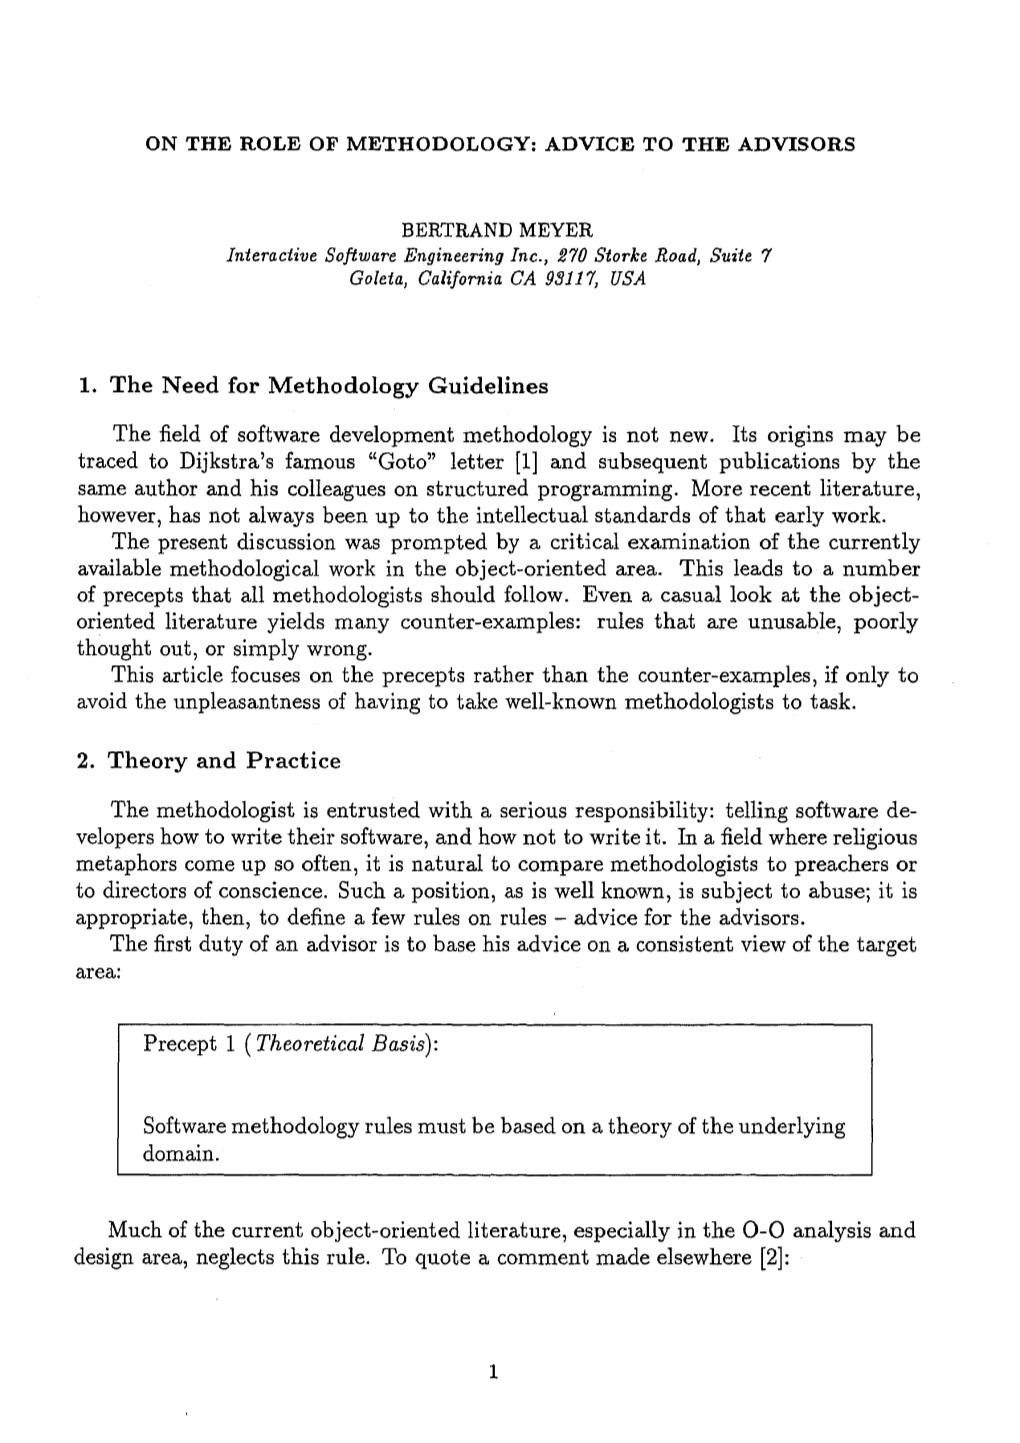 1. the Need for Methodology Guidelines the Field of Software